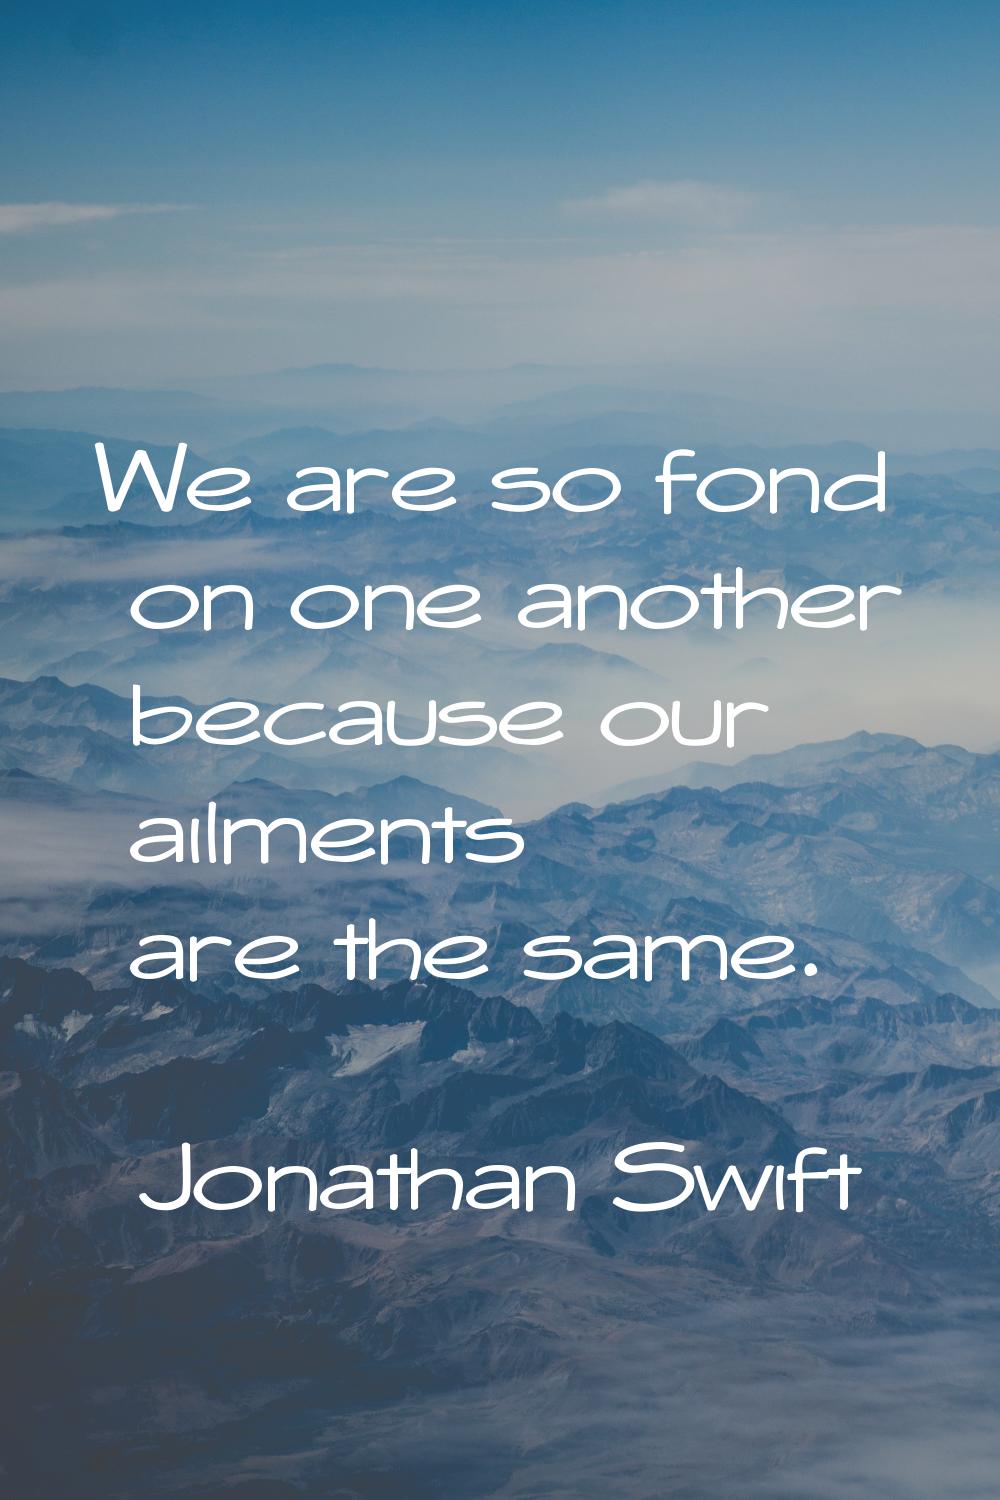 We are so fond on one another because our ailments are the same.